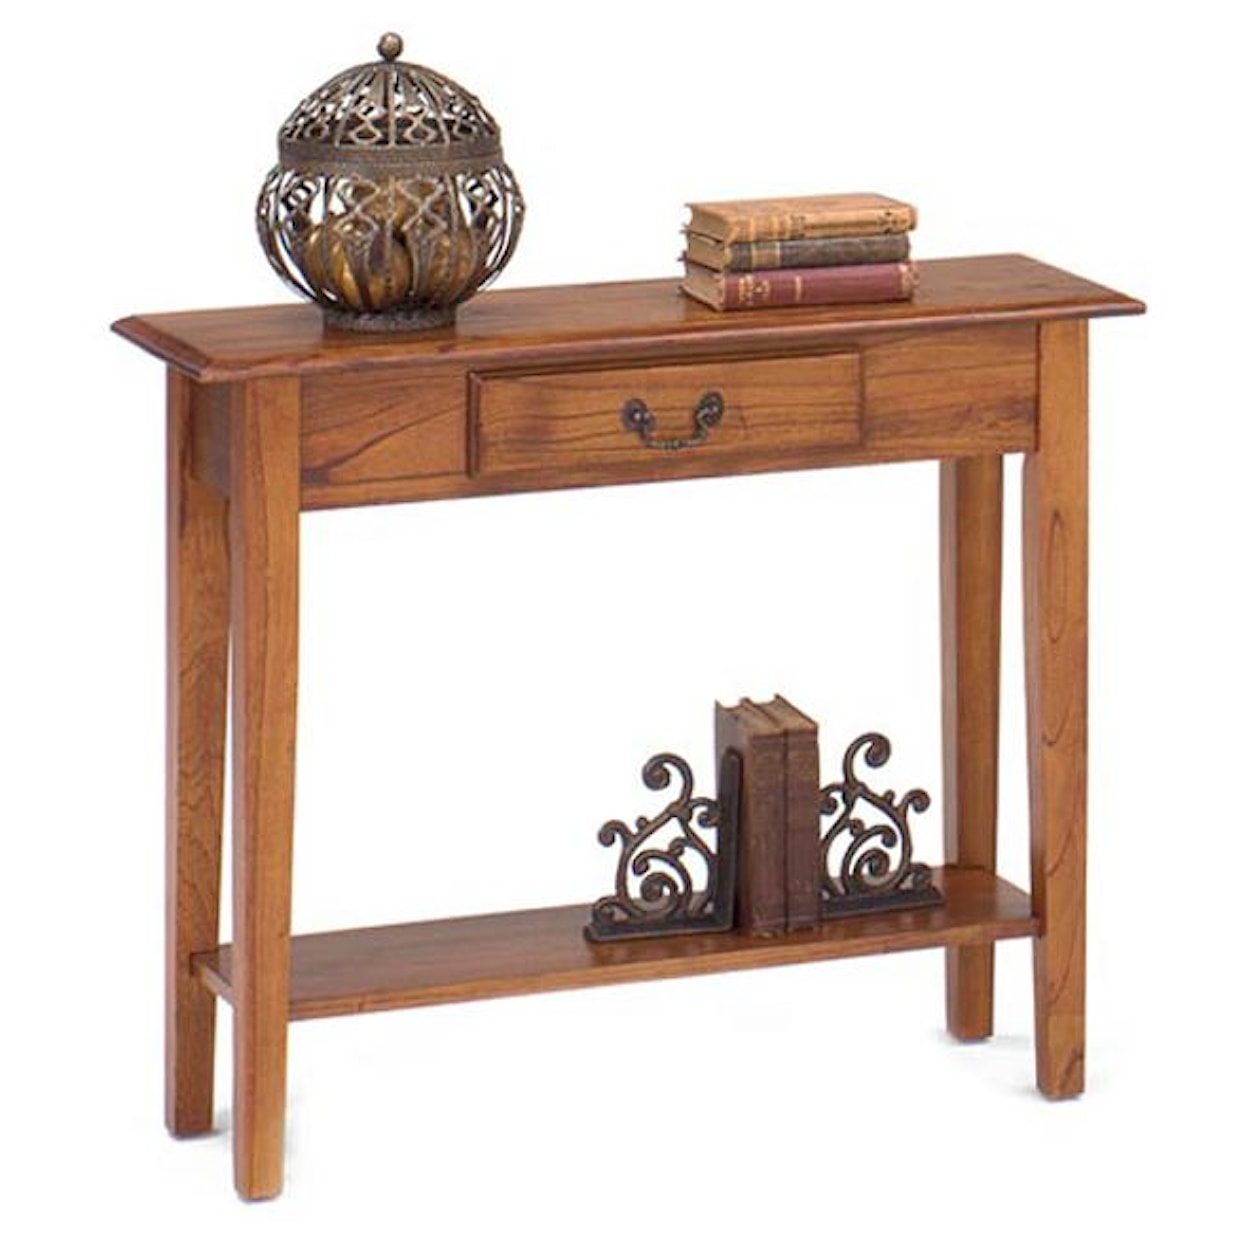 Null Furniture 1900 International Accents Sofa Console Table